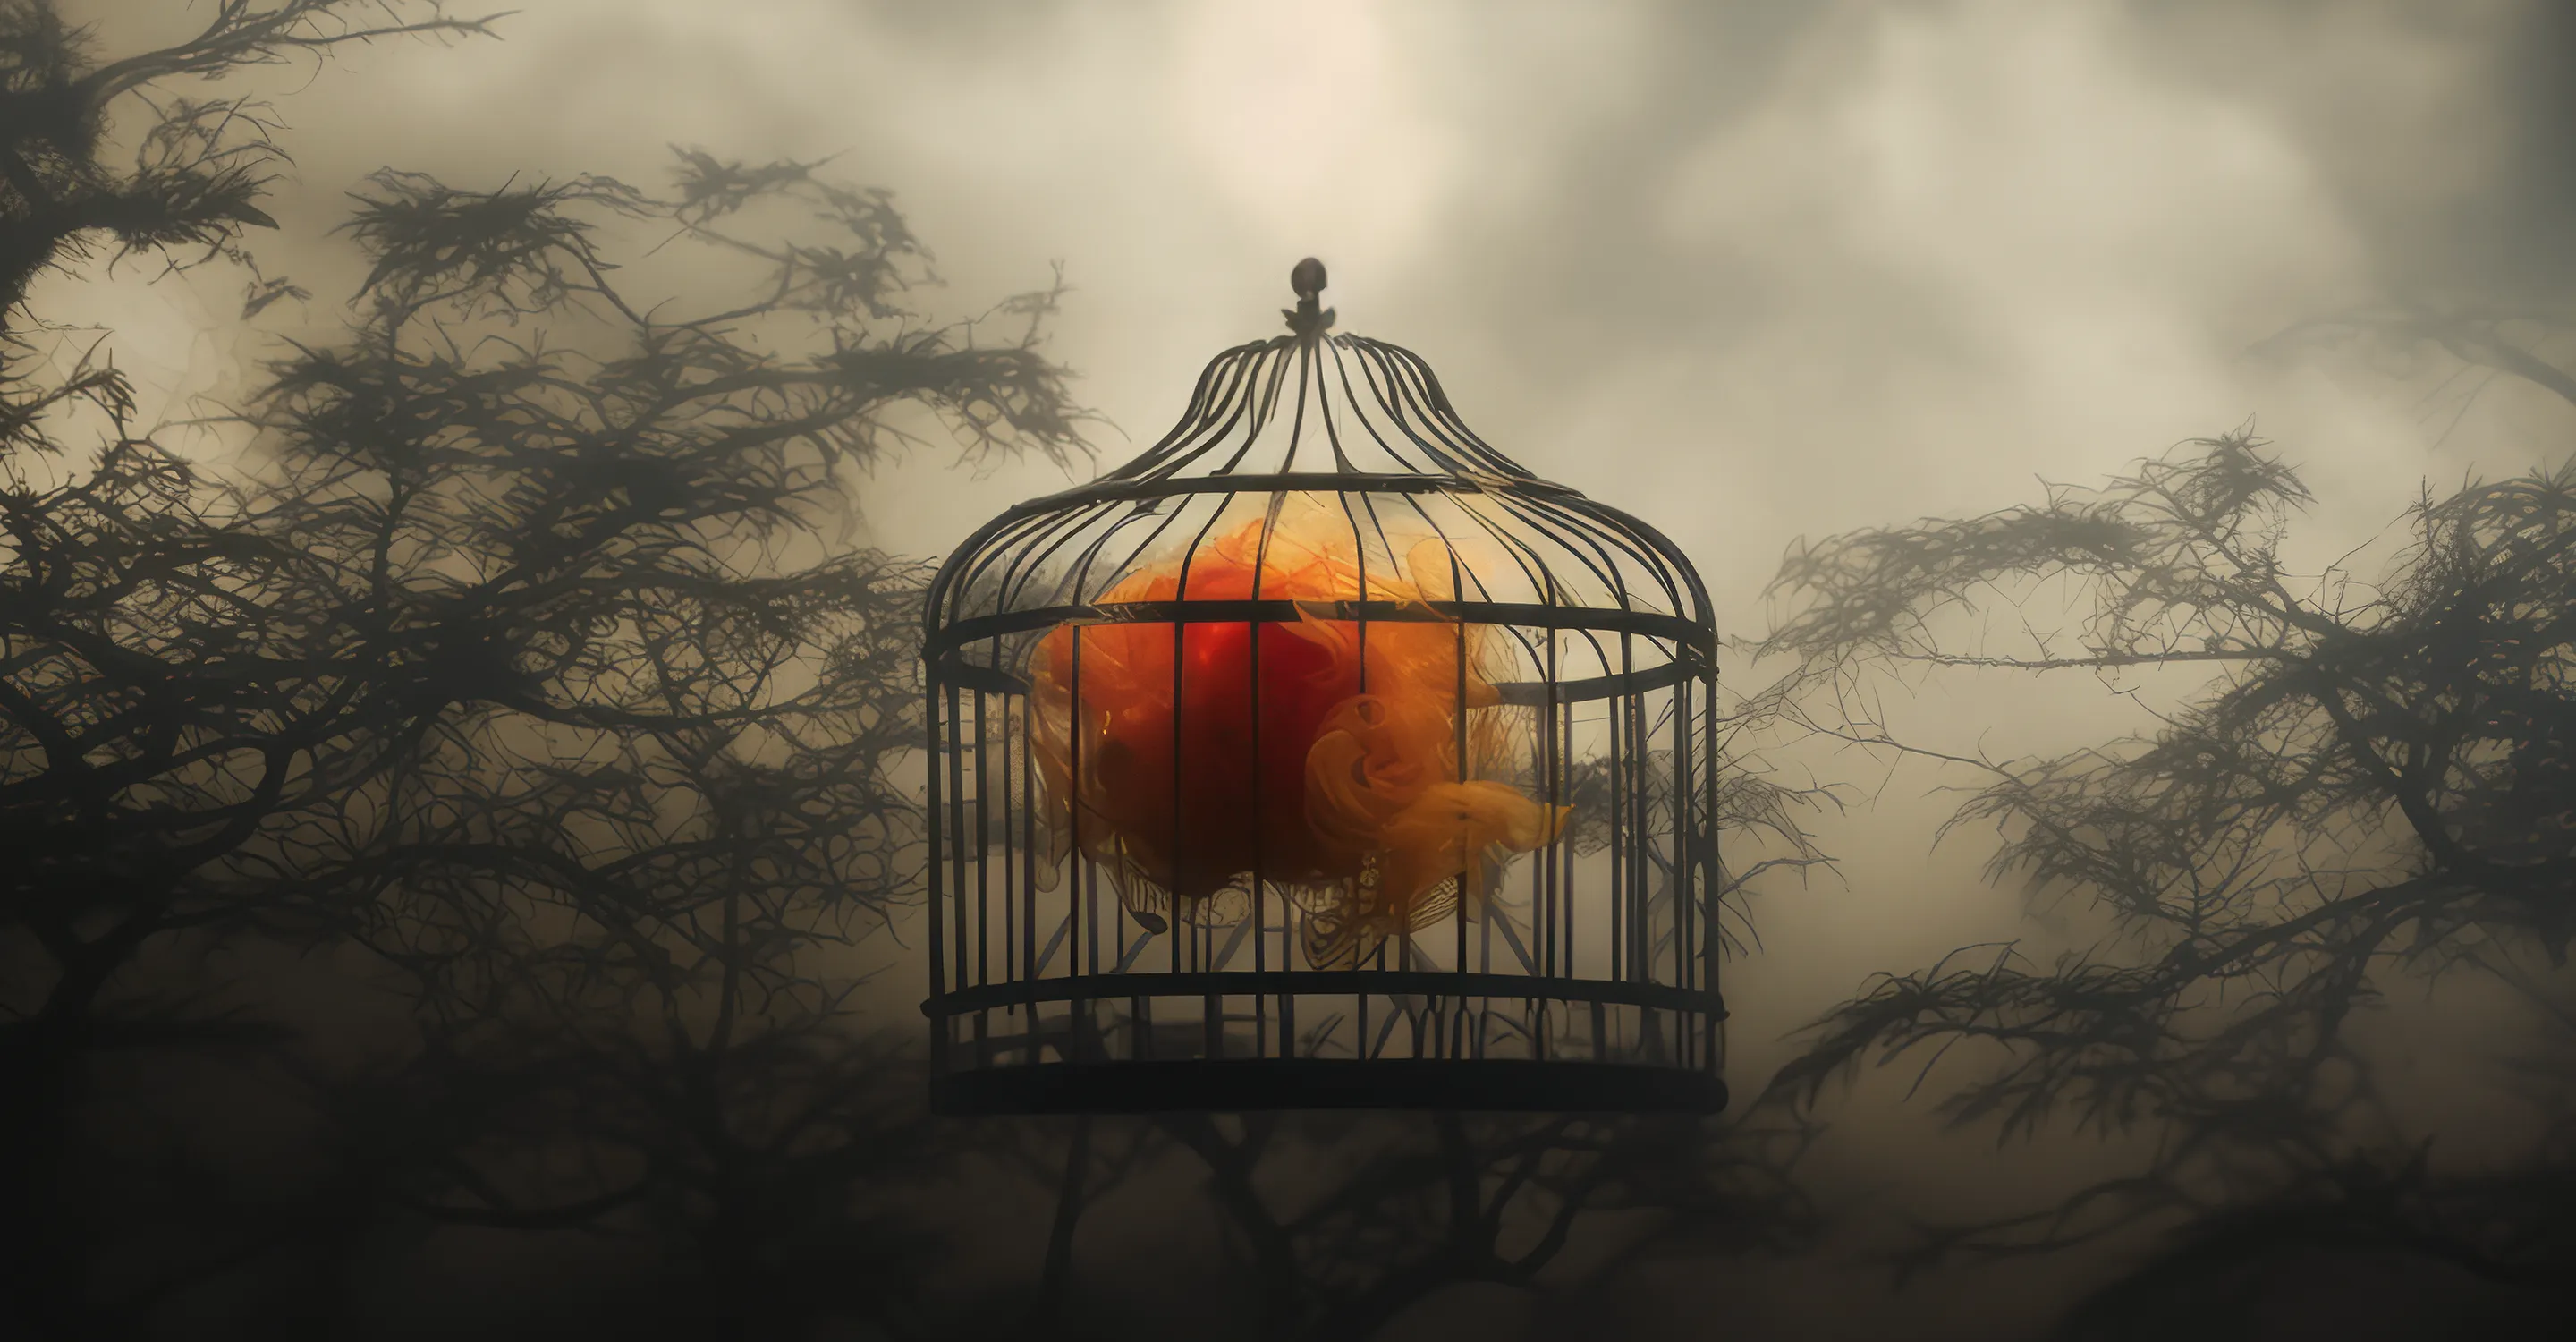 An AI visualization of polycythemia vera symptoms, showing an oversized floating birdcage filled with orange smoke against a cloudy sky